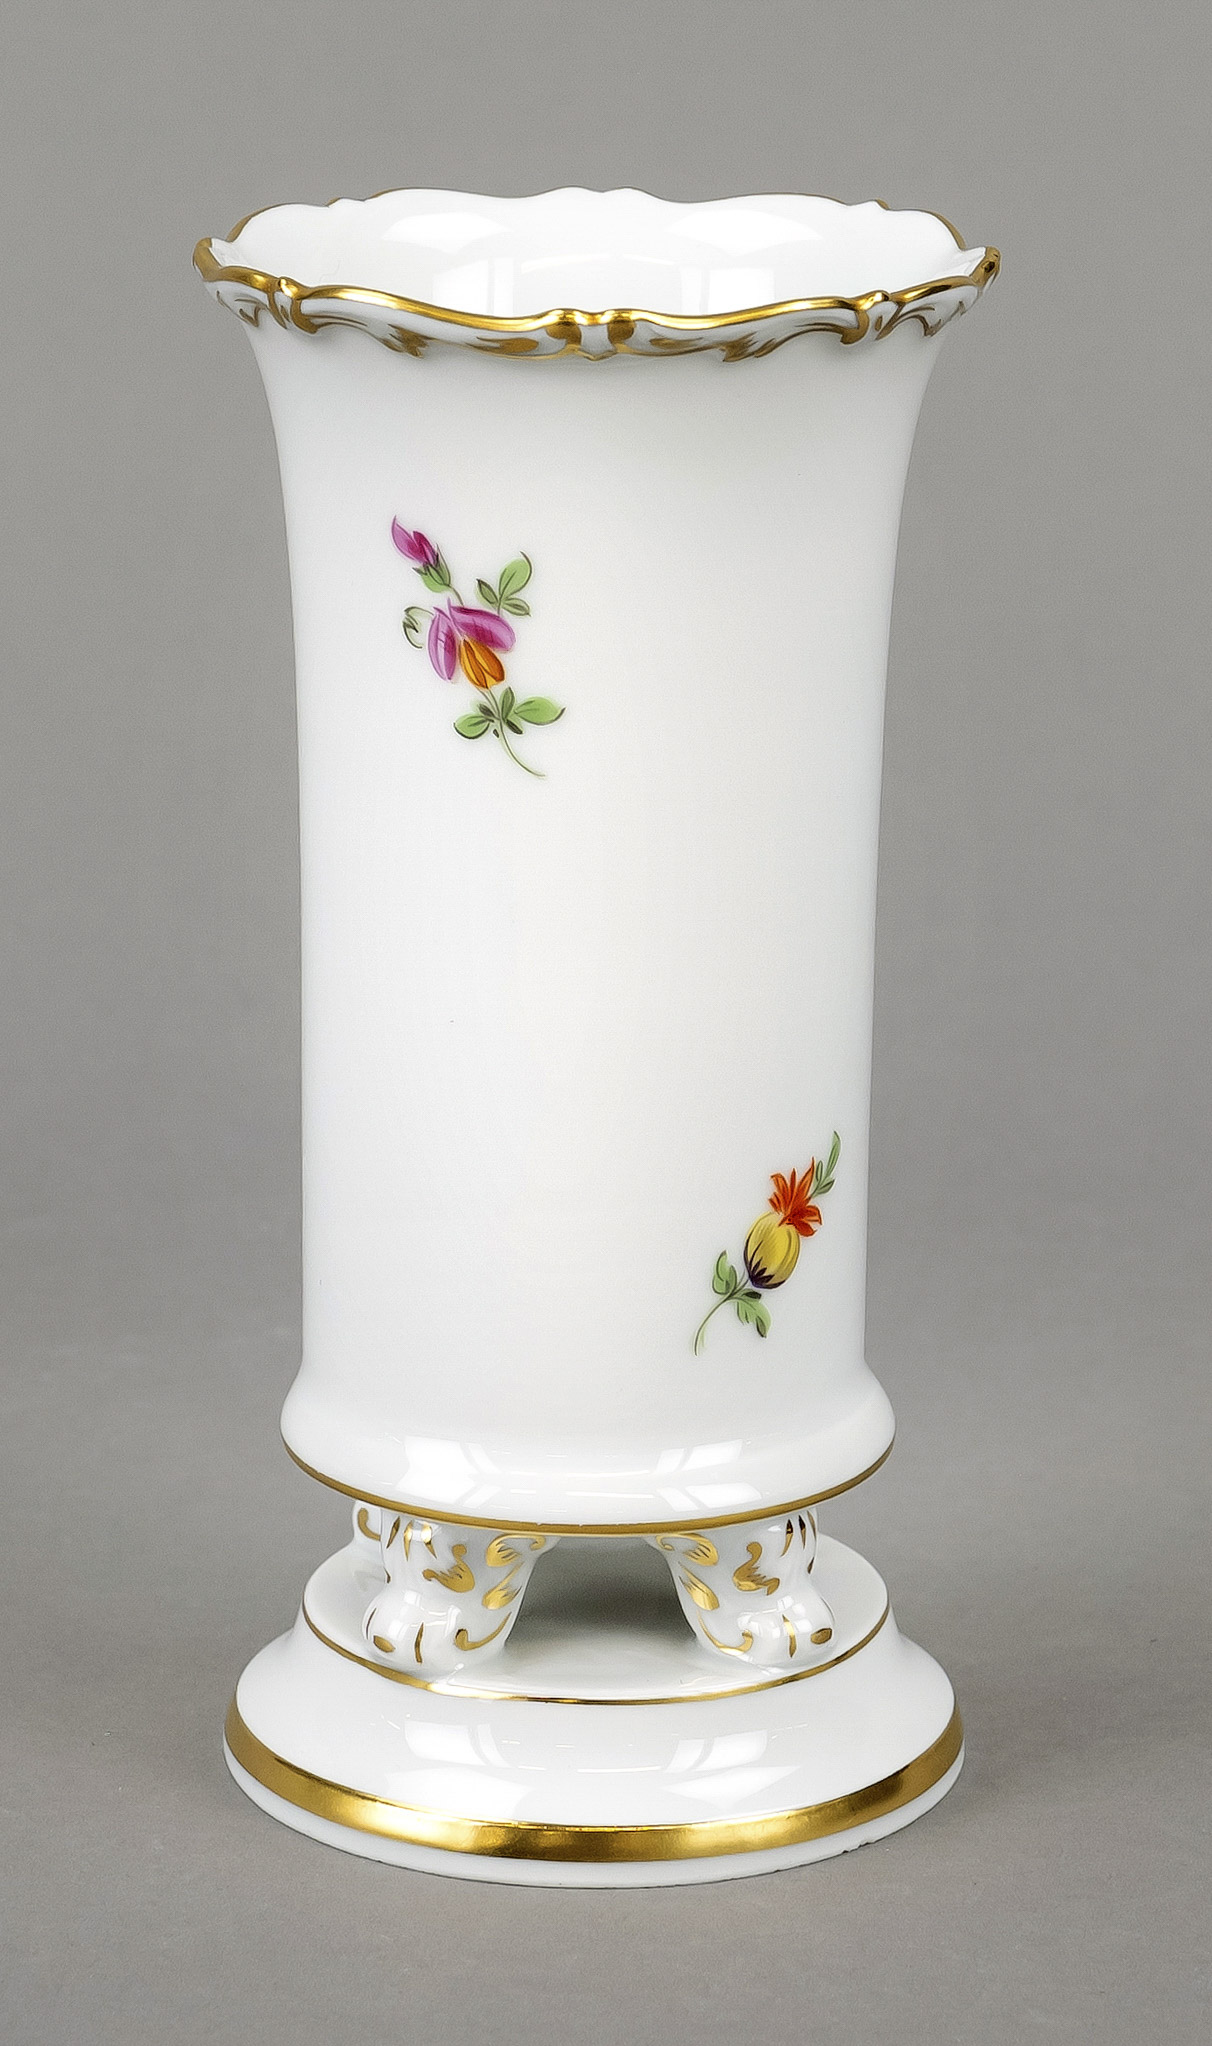 Stove vase, Meissen, 1970s, 1st choice, polychrome floral painting with decorative gilding, h. 14. - Image 2 of 2